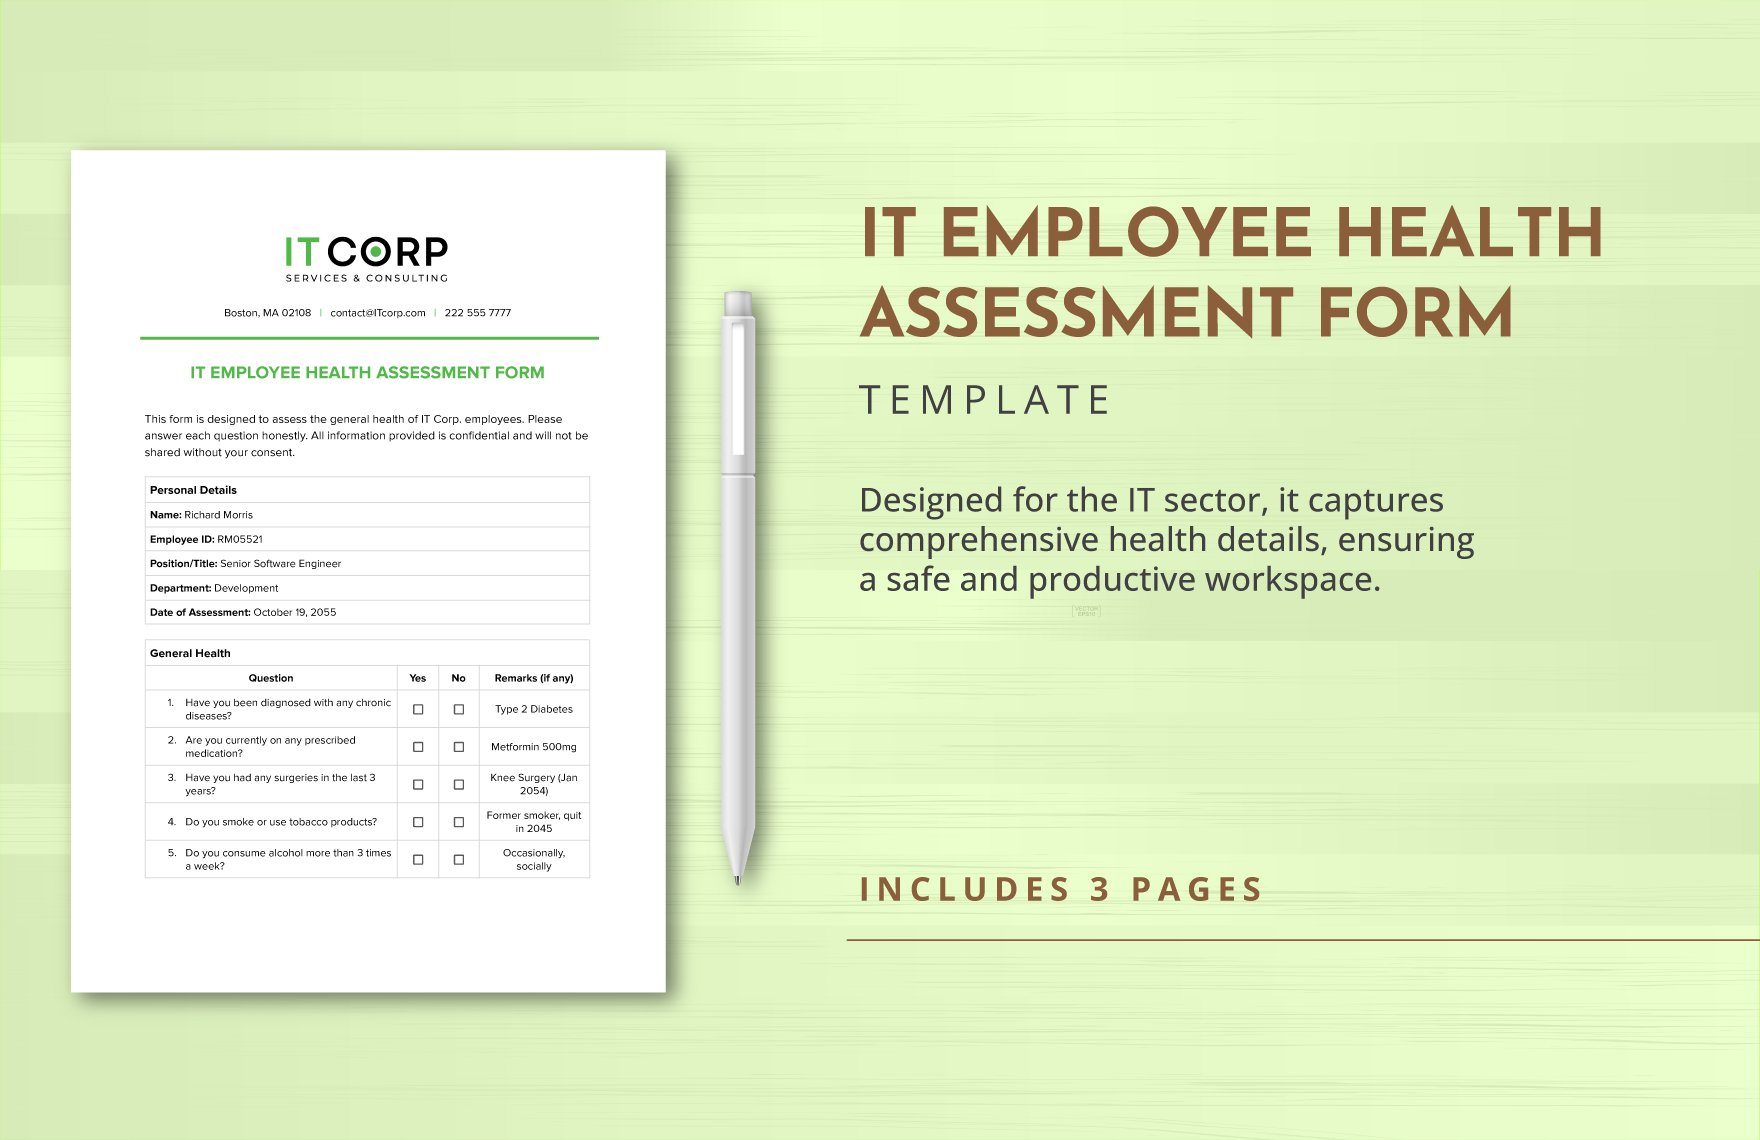 IT Employee Health Assessment Form Template